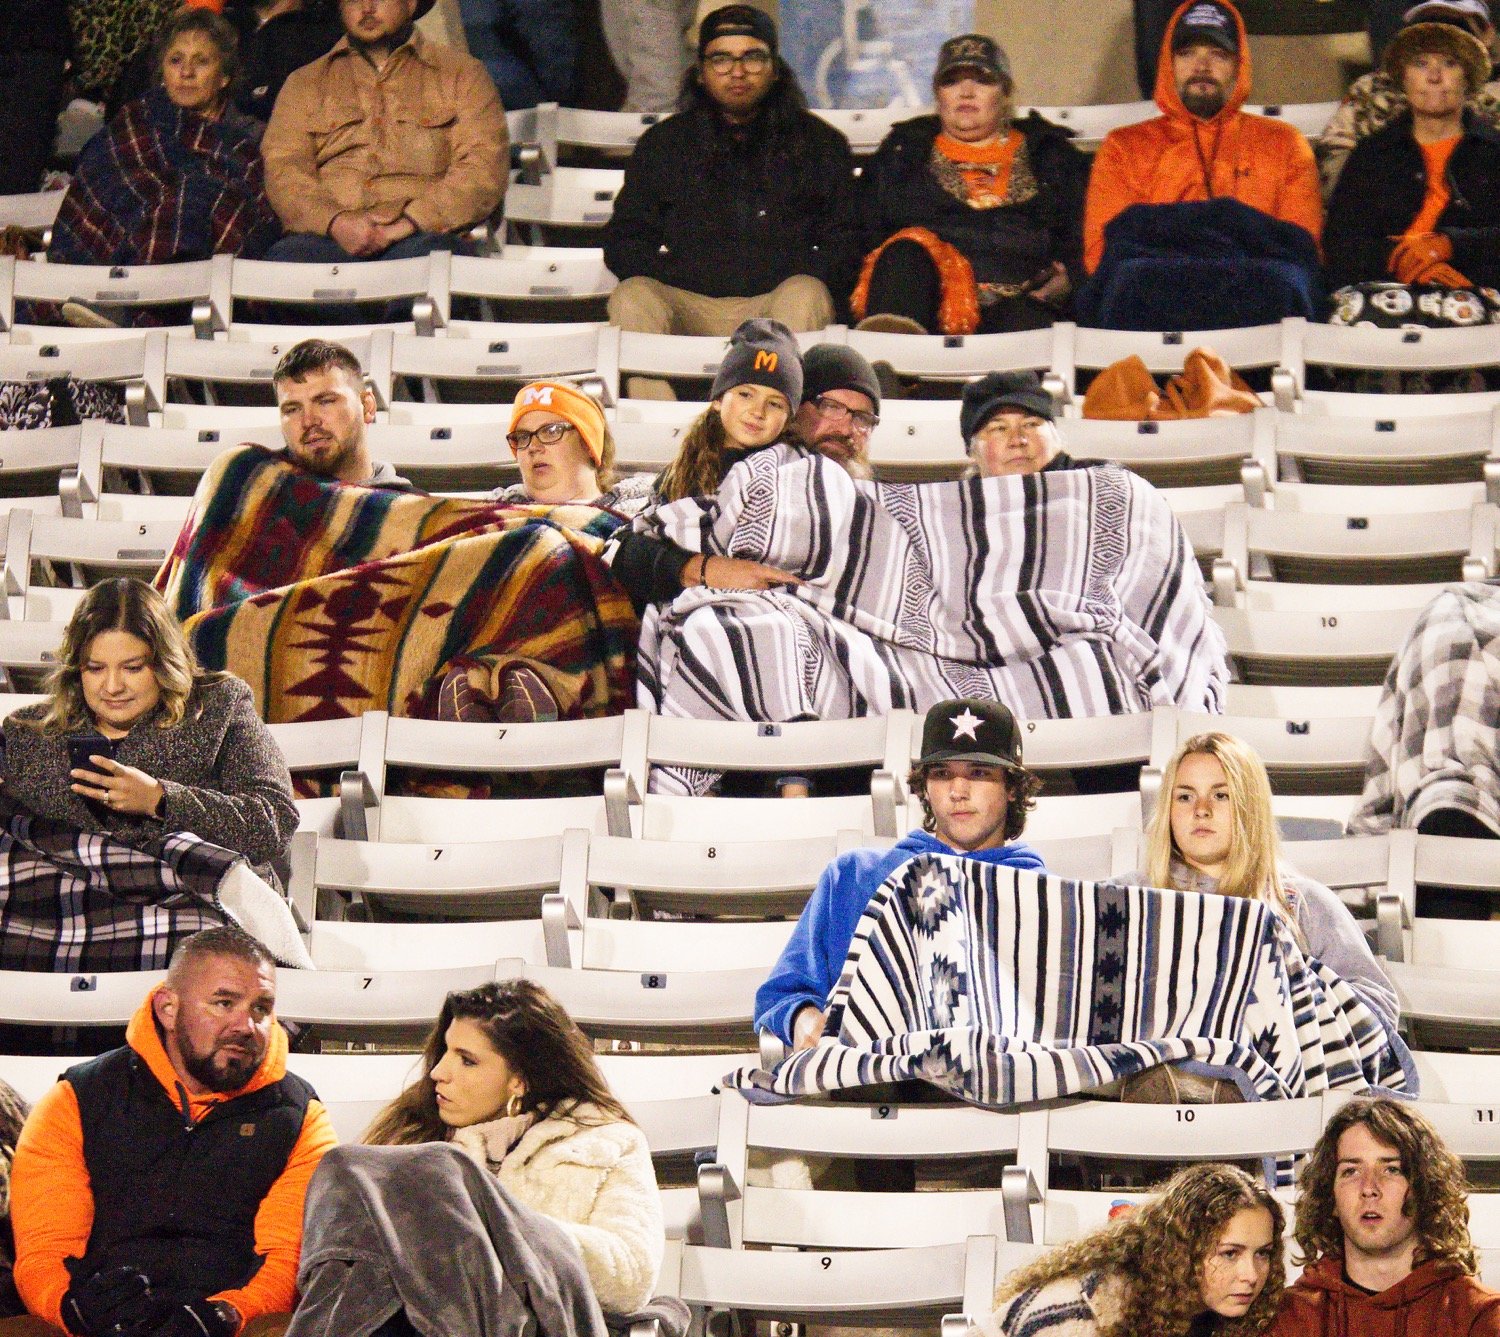 It was a chilly night in Mineola, but these Yellowjacket fans came prepared. [See what else unfolded Friday.]